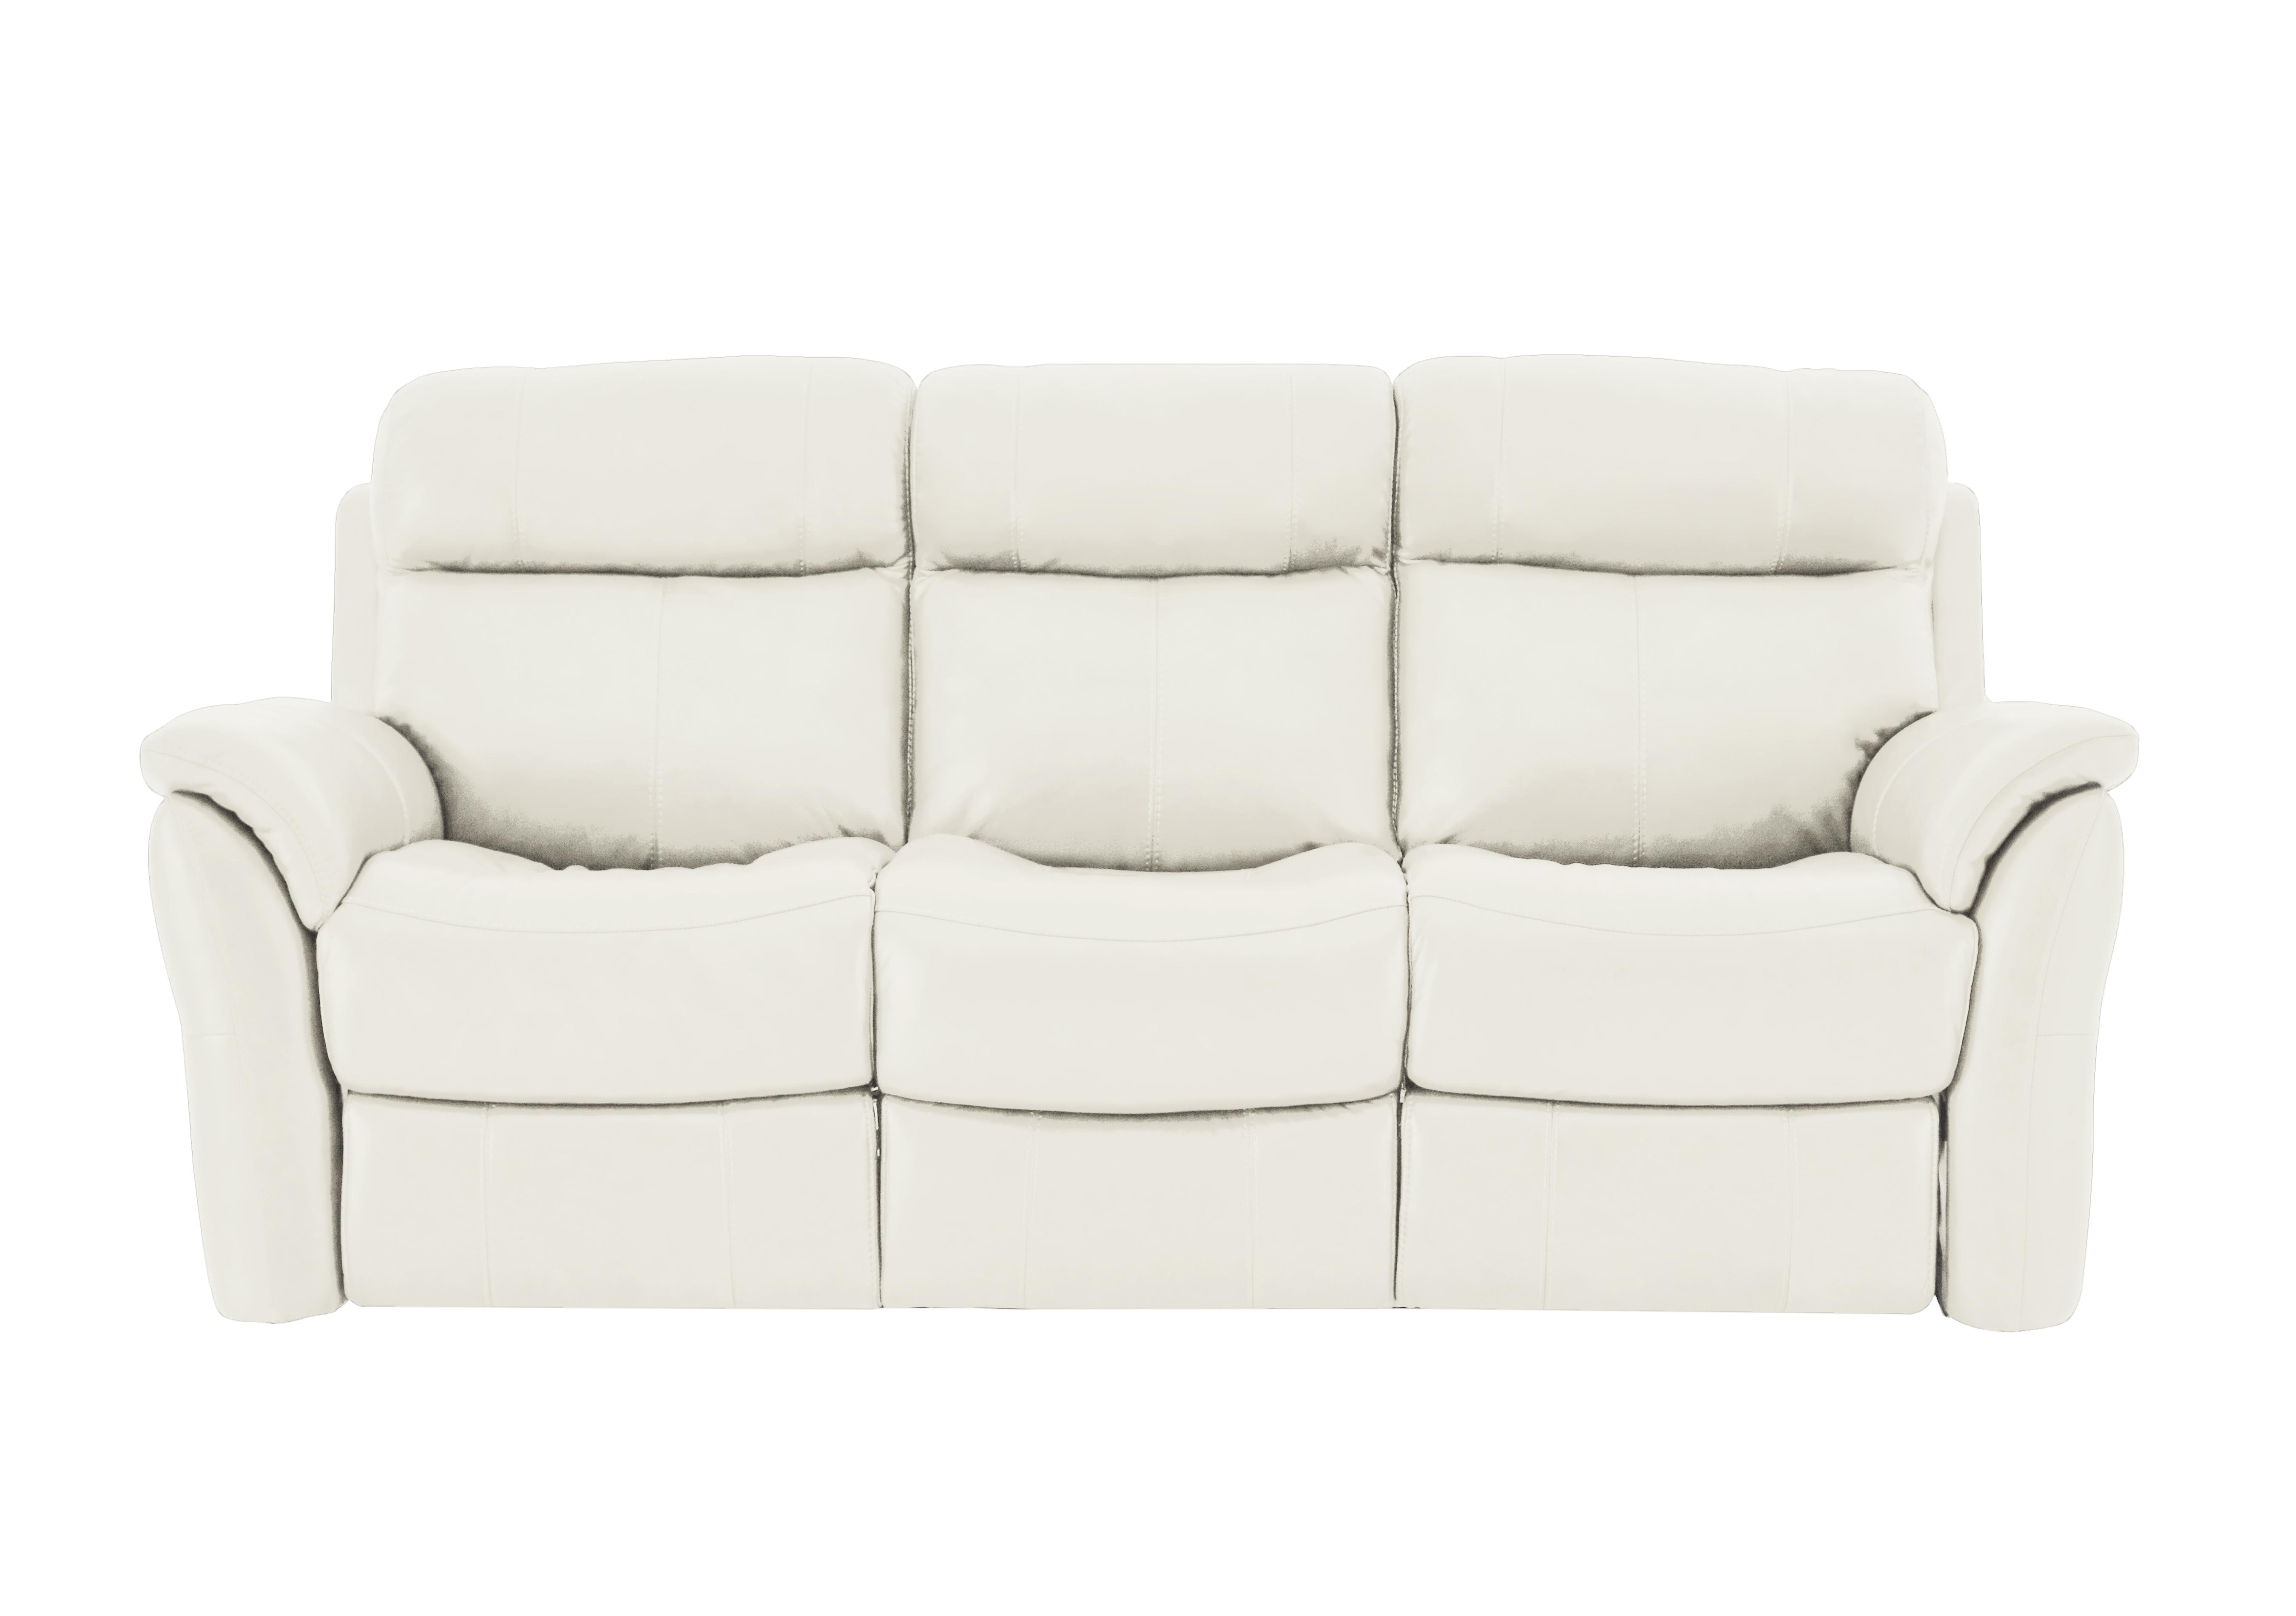 Relax Station Revive 3 Seater Leather Sofa in Bv-744d Star White on Furniture Village